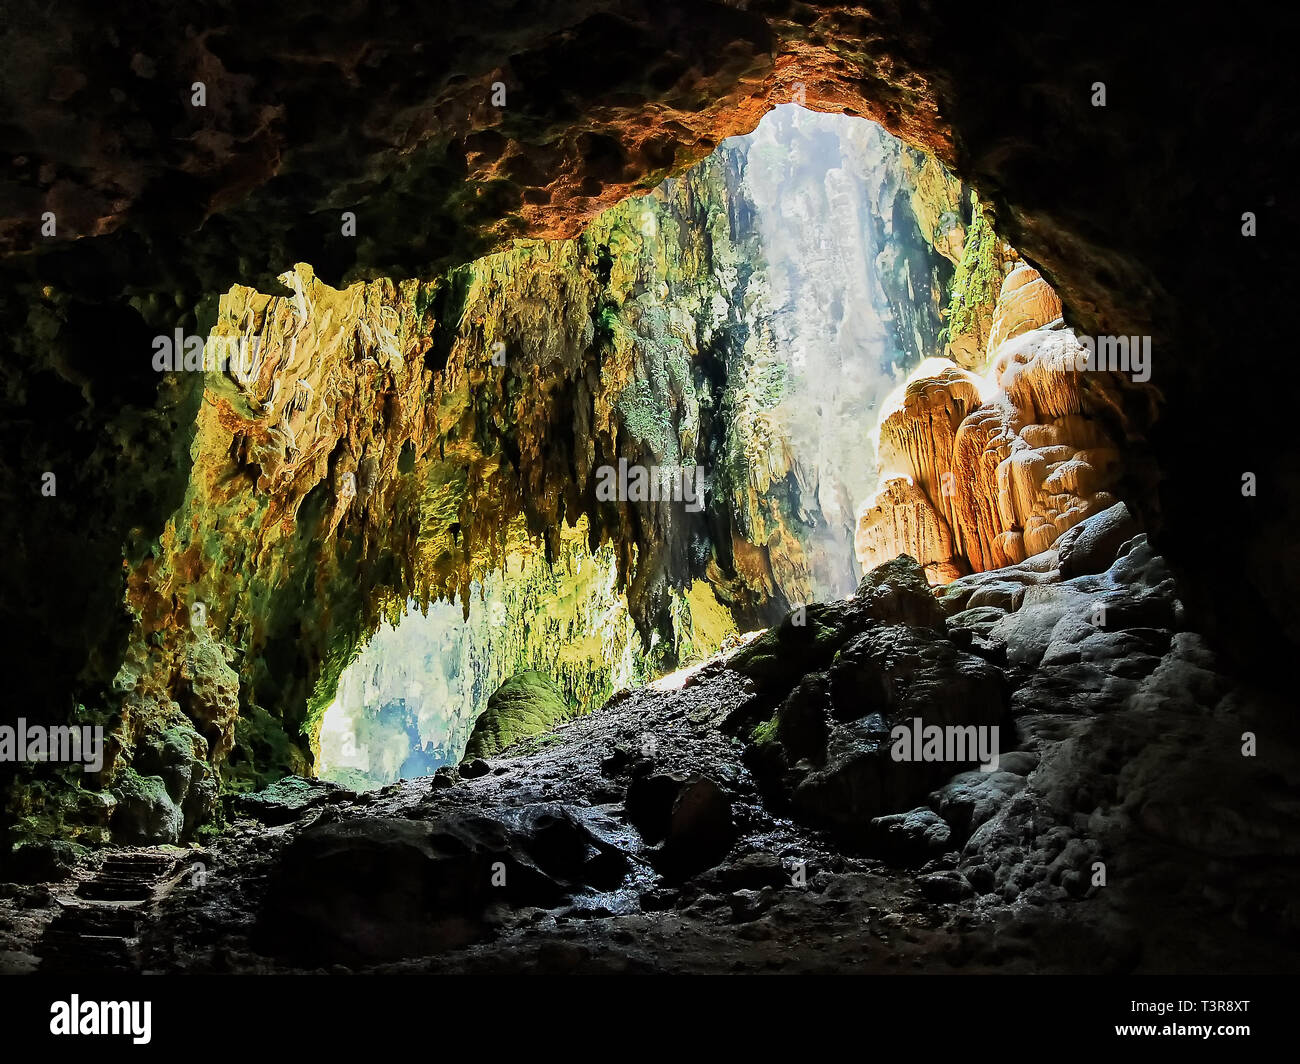 Penablanca, Cagayan Province, Philippines - May 19, 2008: View into one chamber of the limestone Callao Cave with sunlight entering from the rooftop Stock Photo